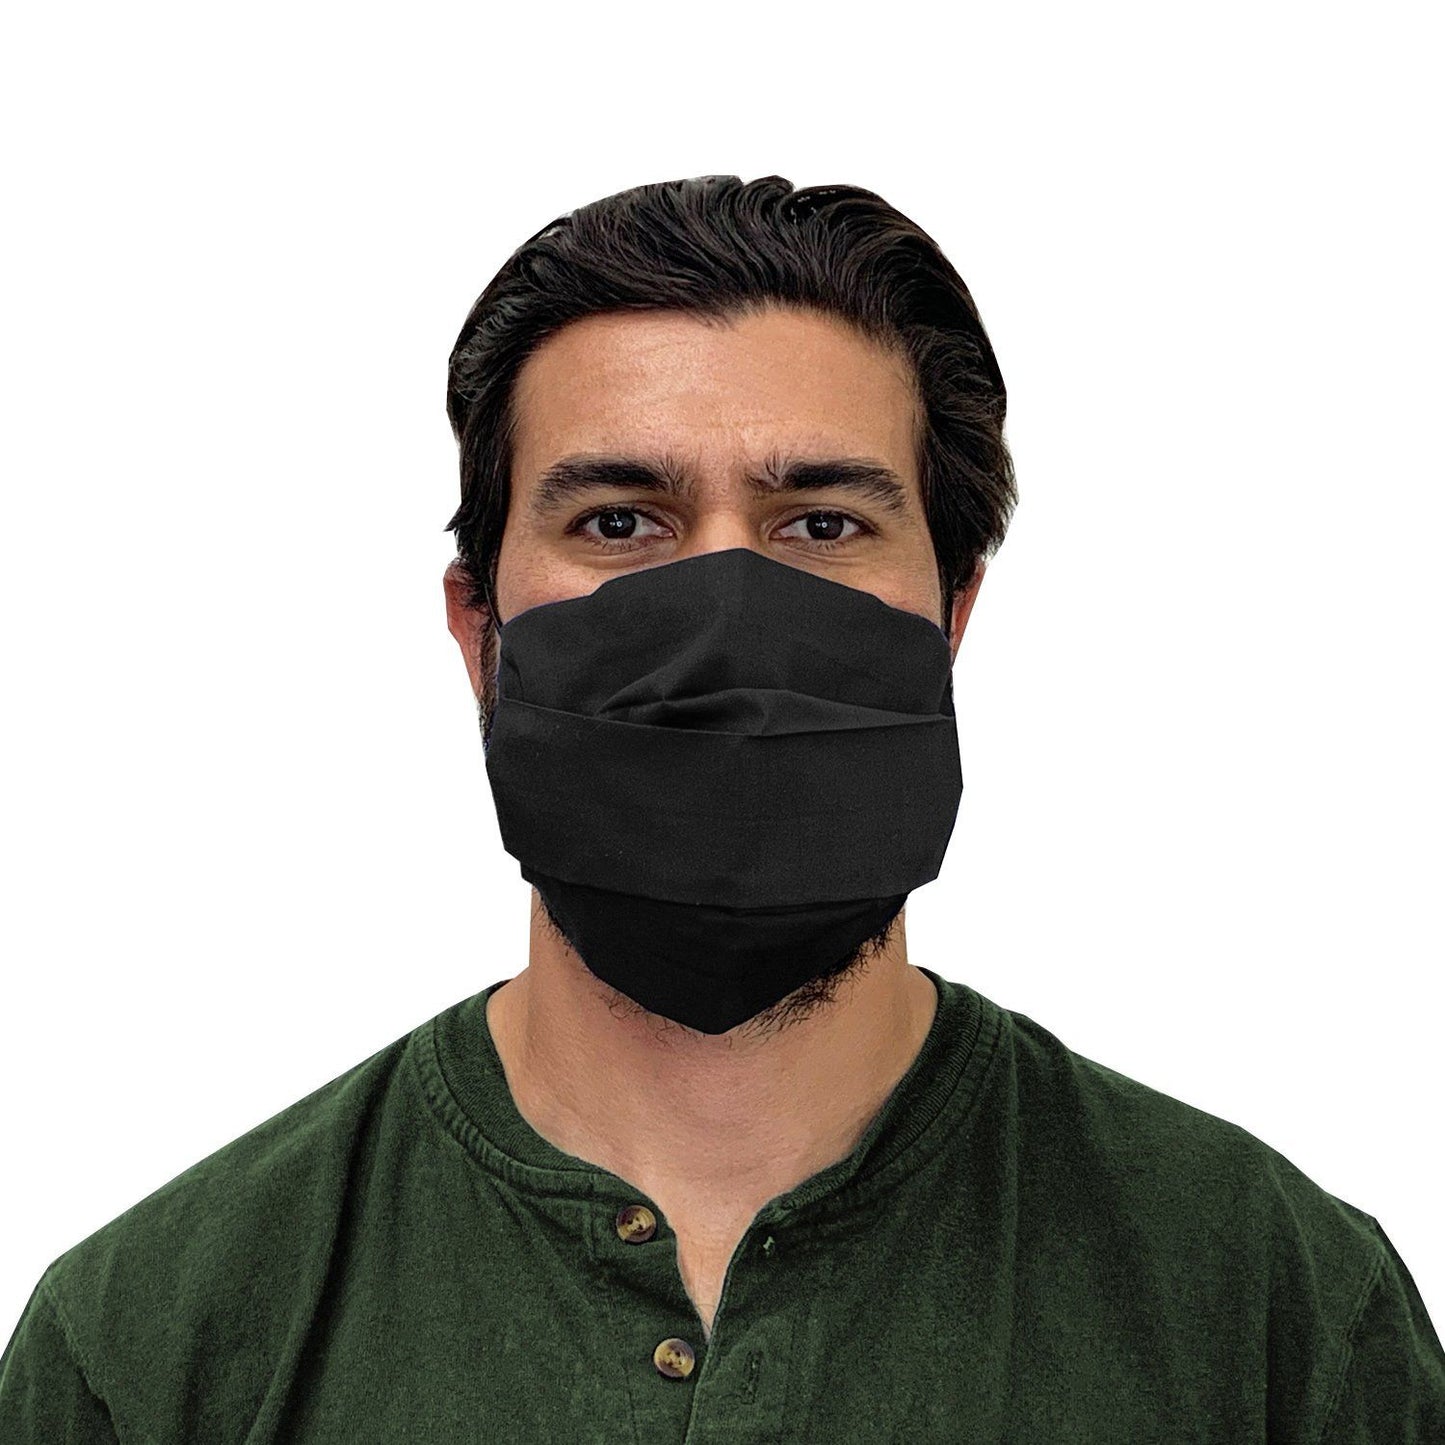 XL Face Mask- Reusable & Washable with Cotton Blend Fabric - Adjustable with Pocket Filter Face Mask Square Up Fashions 